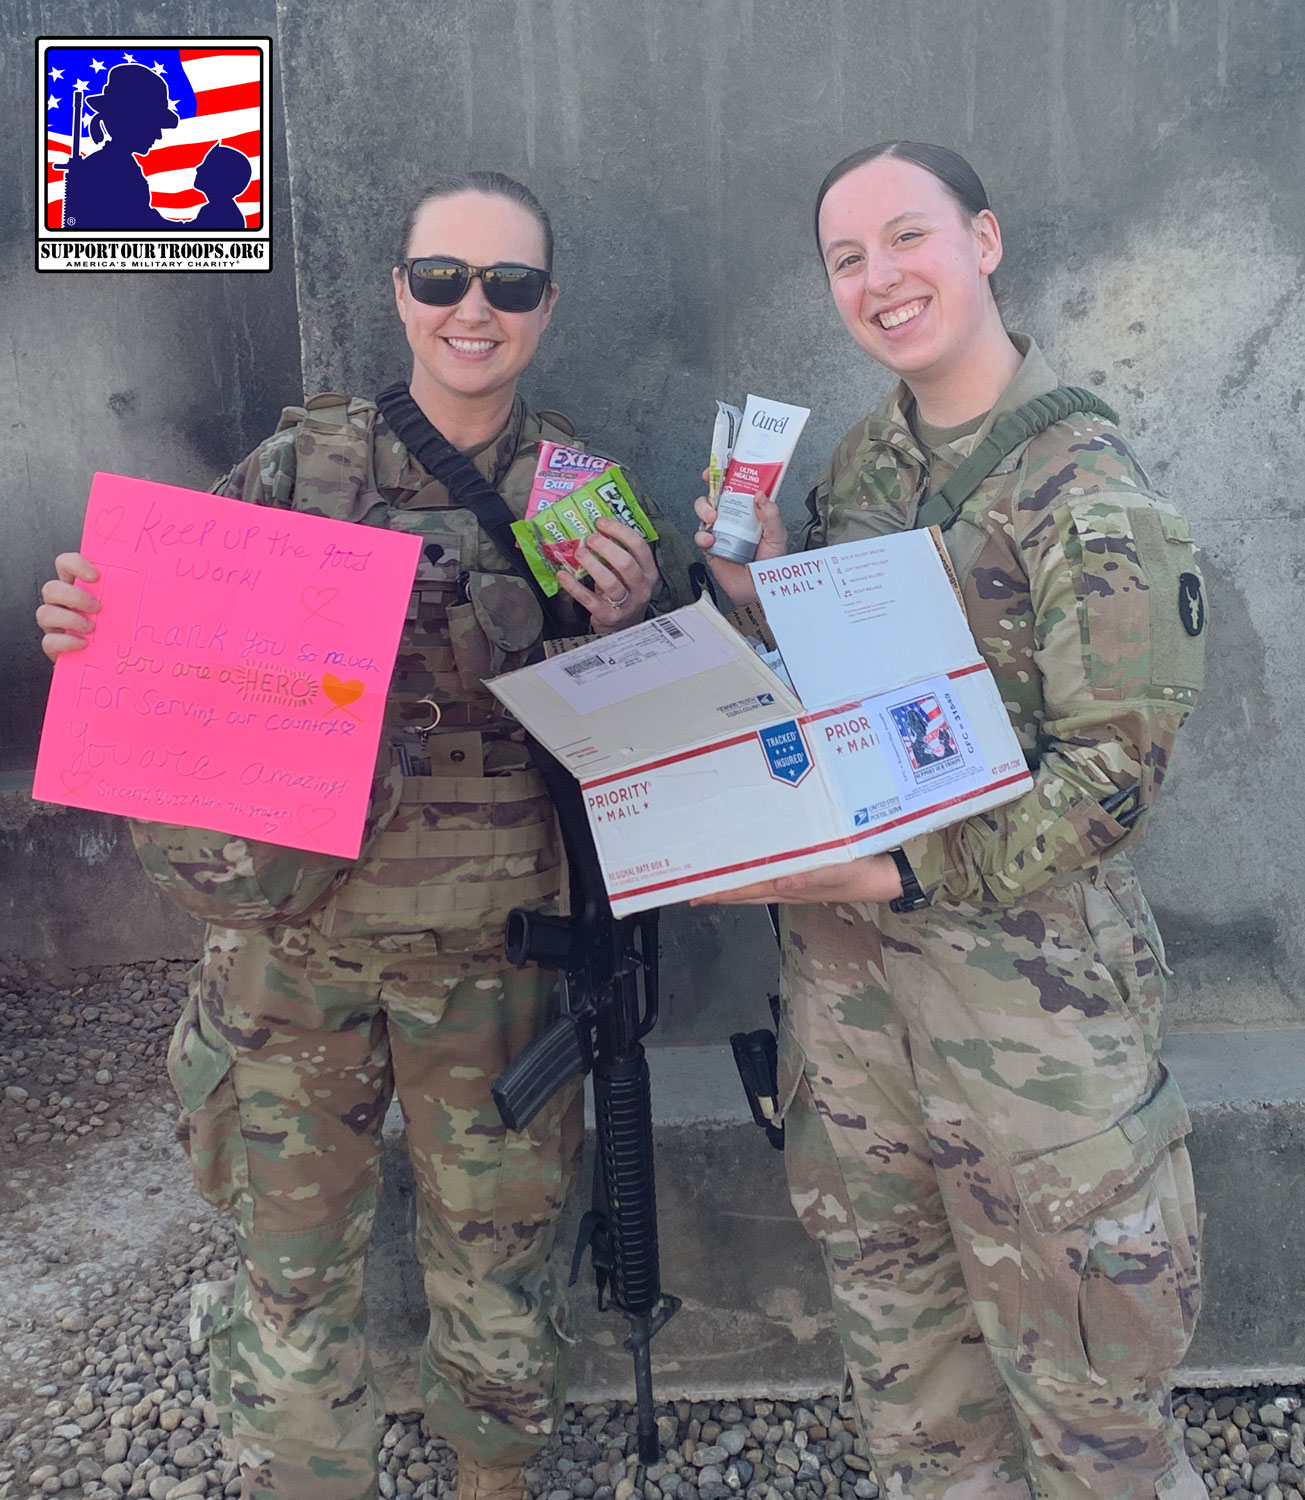 LOCATION UNDISCLOSED, April 4, 2020-Received this care package today (I’m the one in the left) and I got to share it with one of my battle buddies!  Thank you so much this box was absolutely perfect! God Bless you all ~~ SPC Meghan [  ]